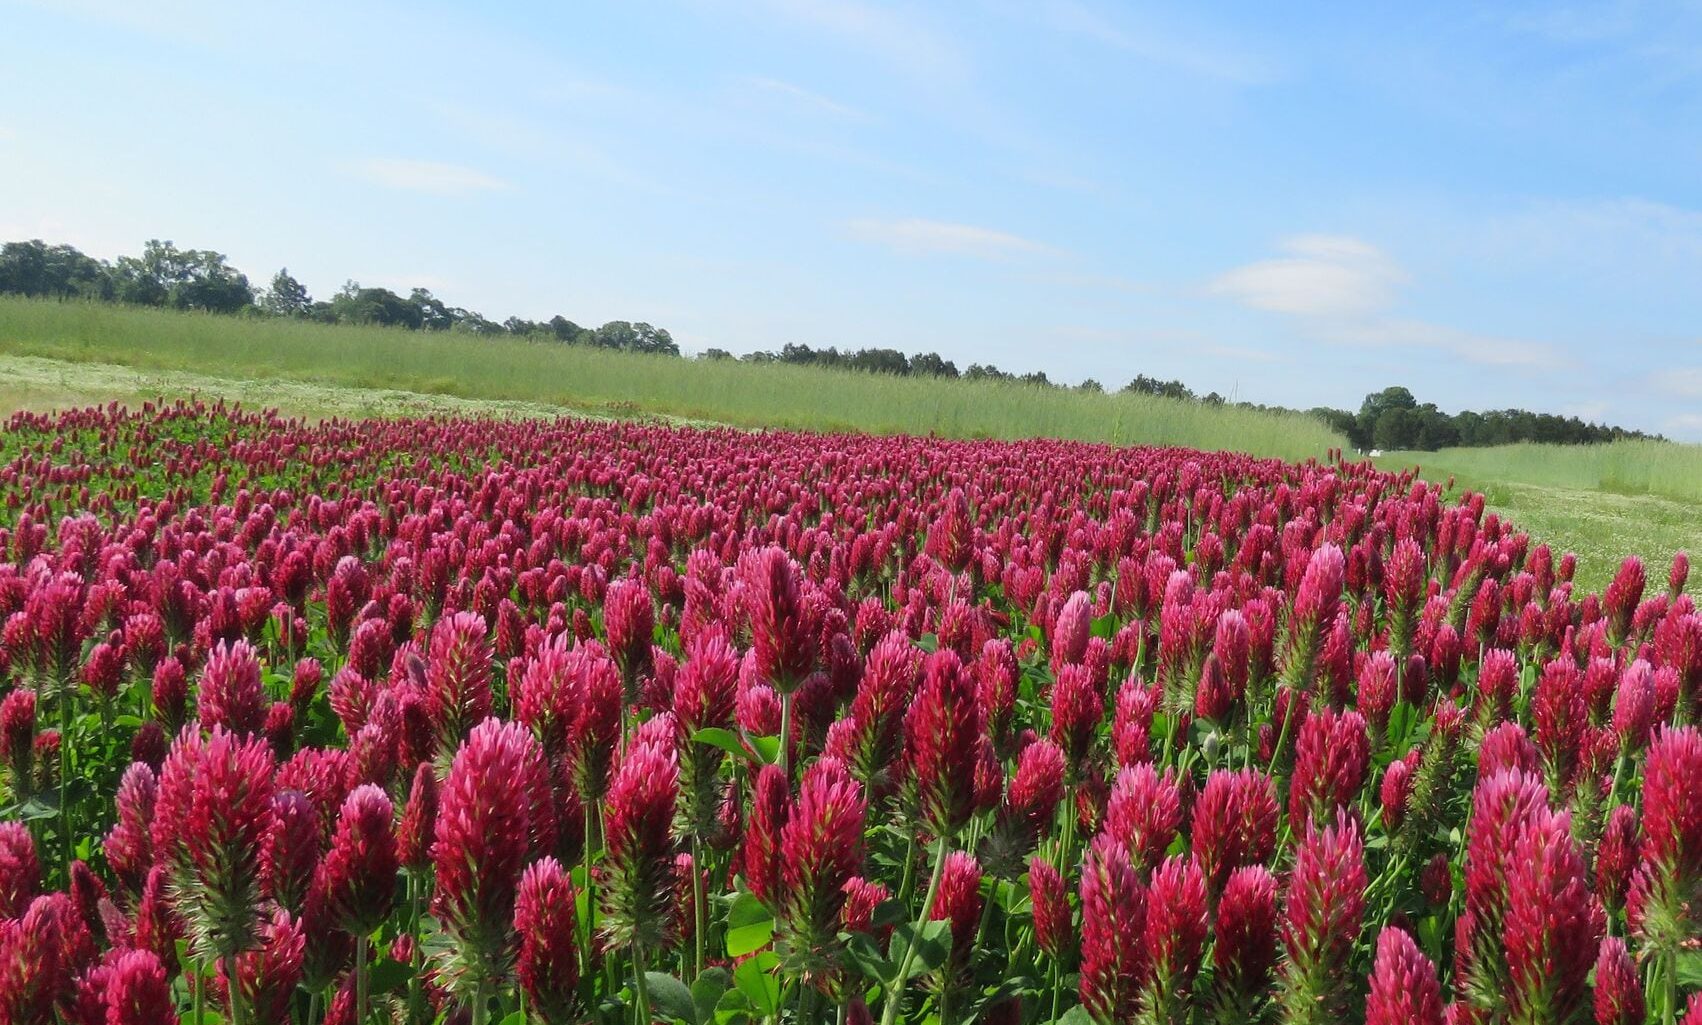 A field of crimson clover planted as a cover crop.